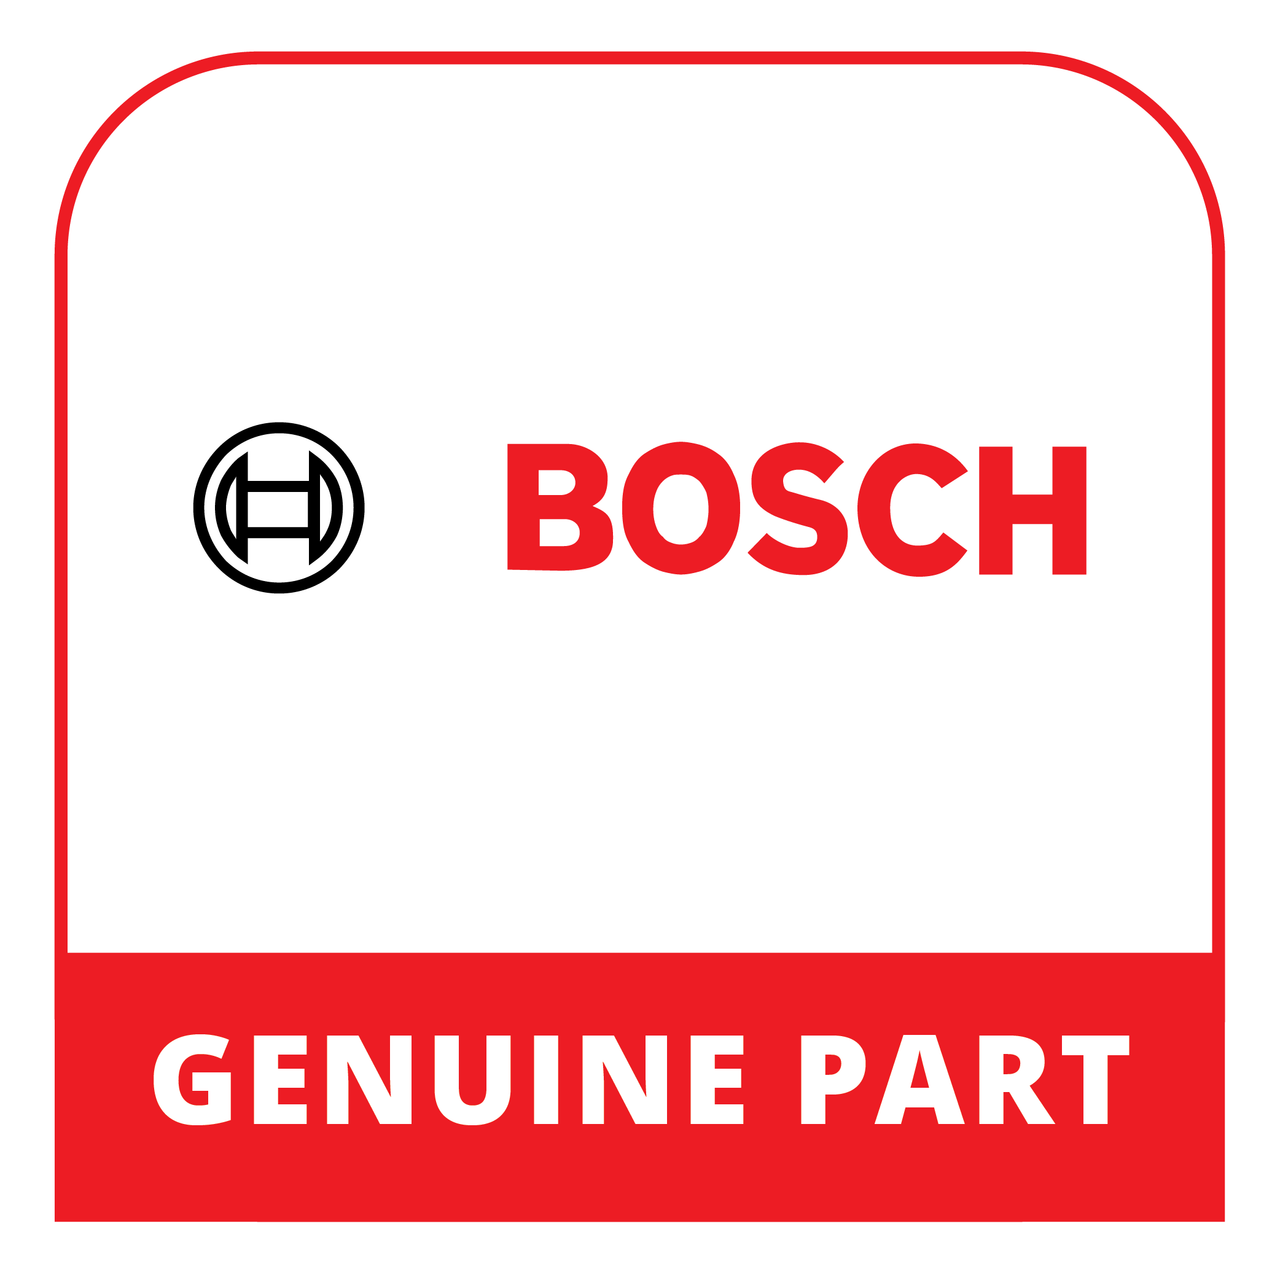 Bosch (Thermador) 11024698 - Panel-Base - Genuine Bosch (Thermador) Part